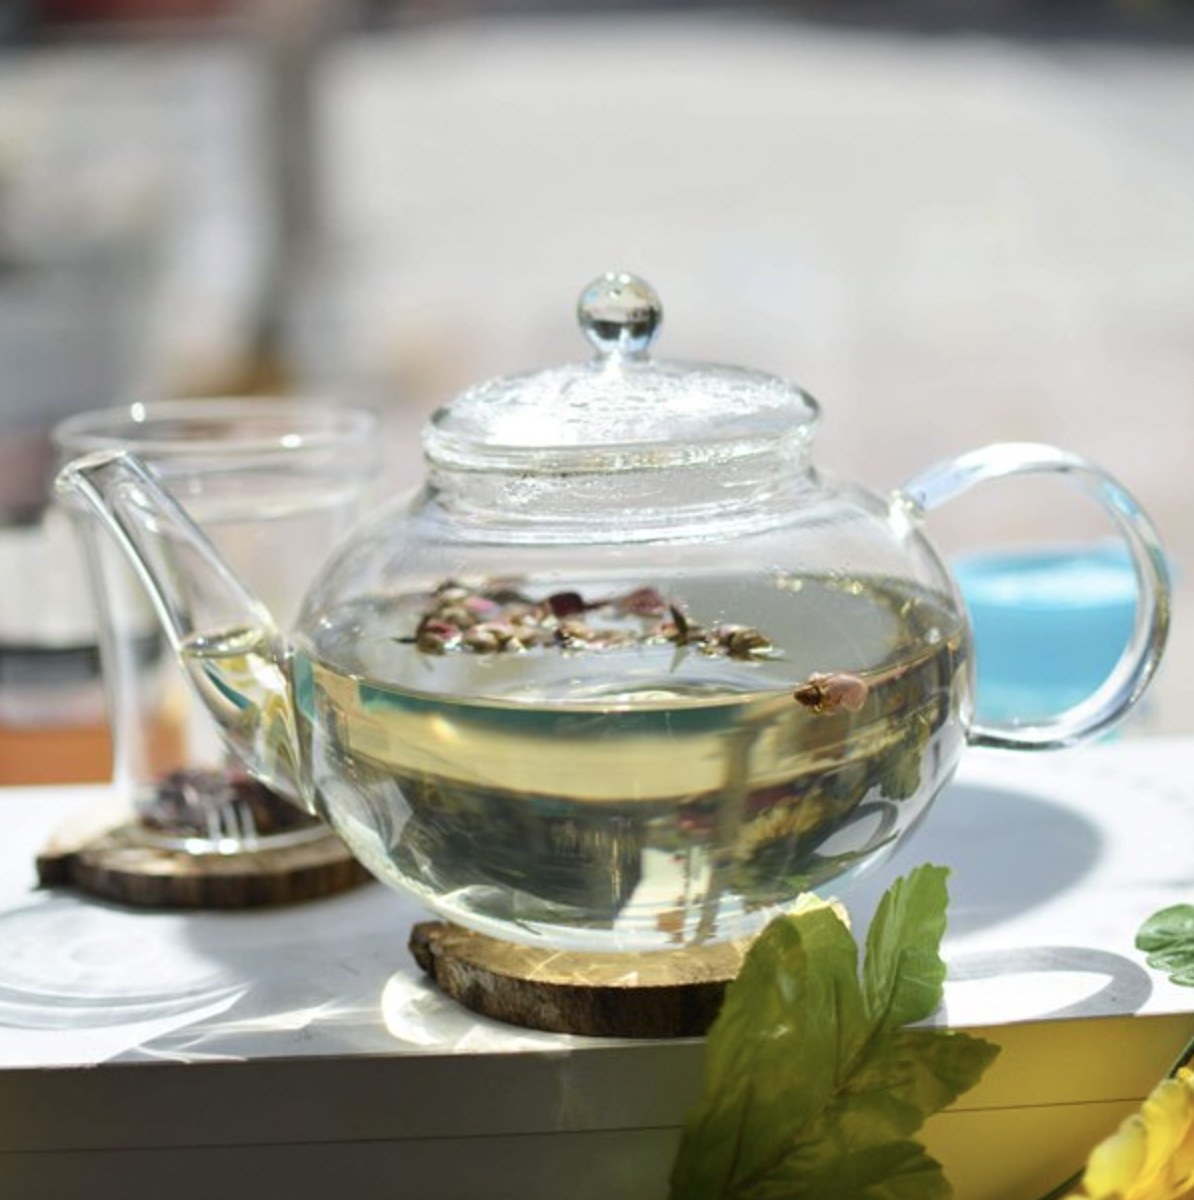 The glass teapot with loose leaf tea brewing